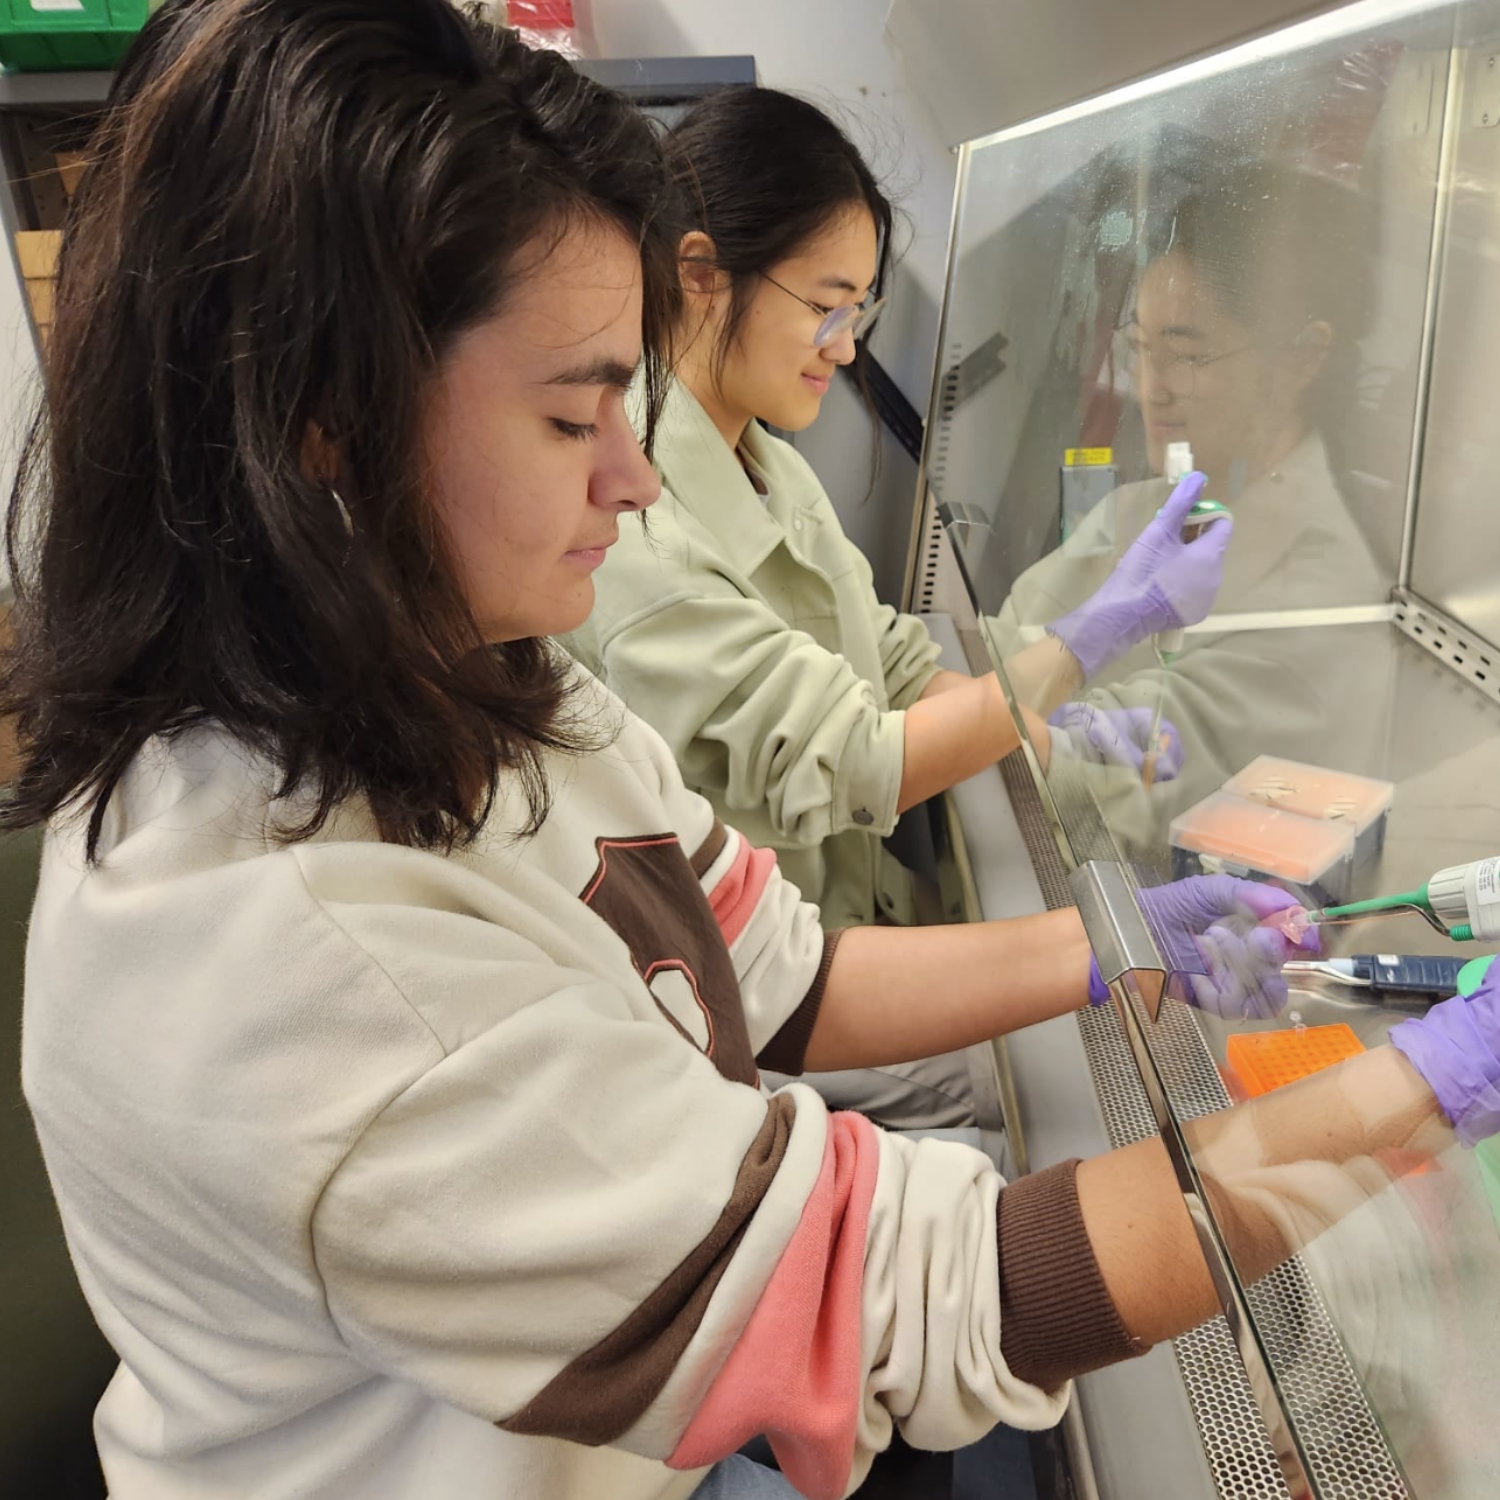 Students use pipettes under laboratory hood